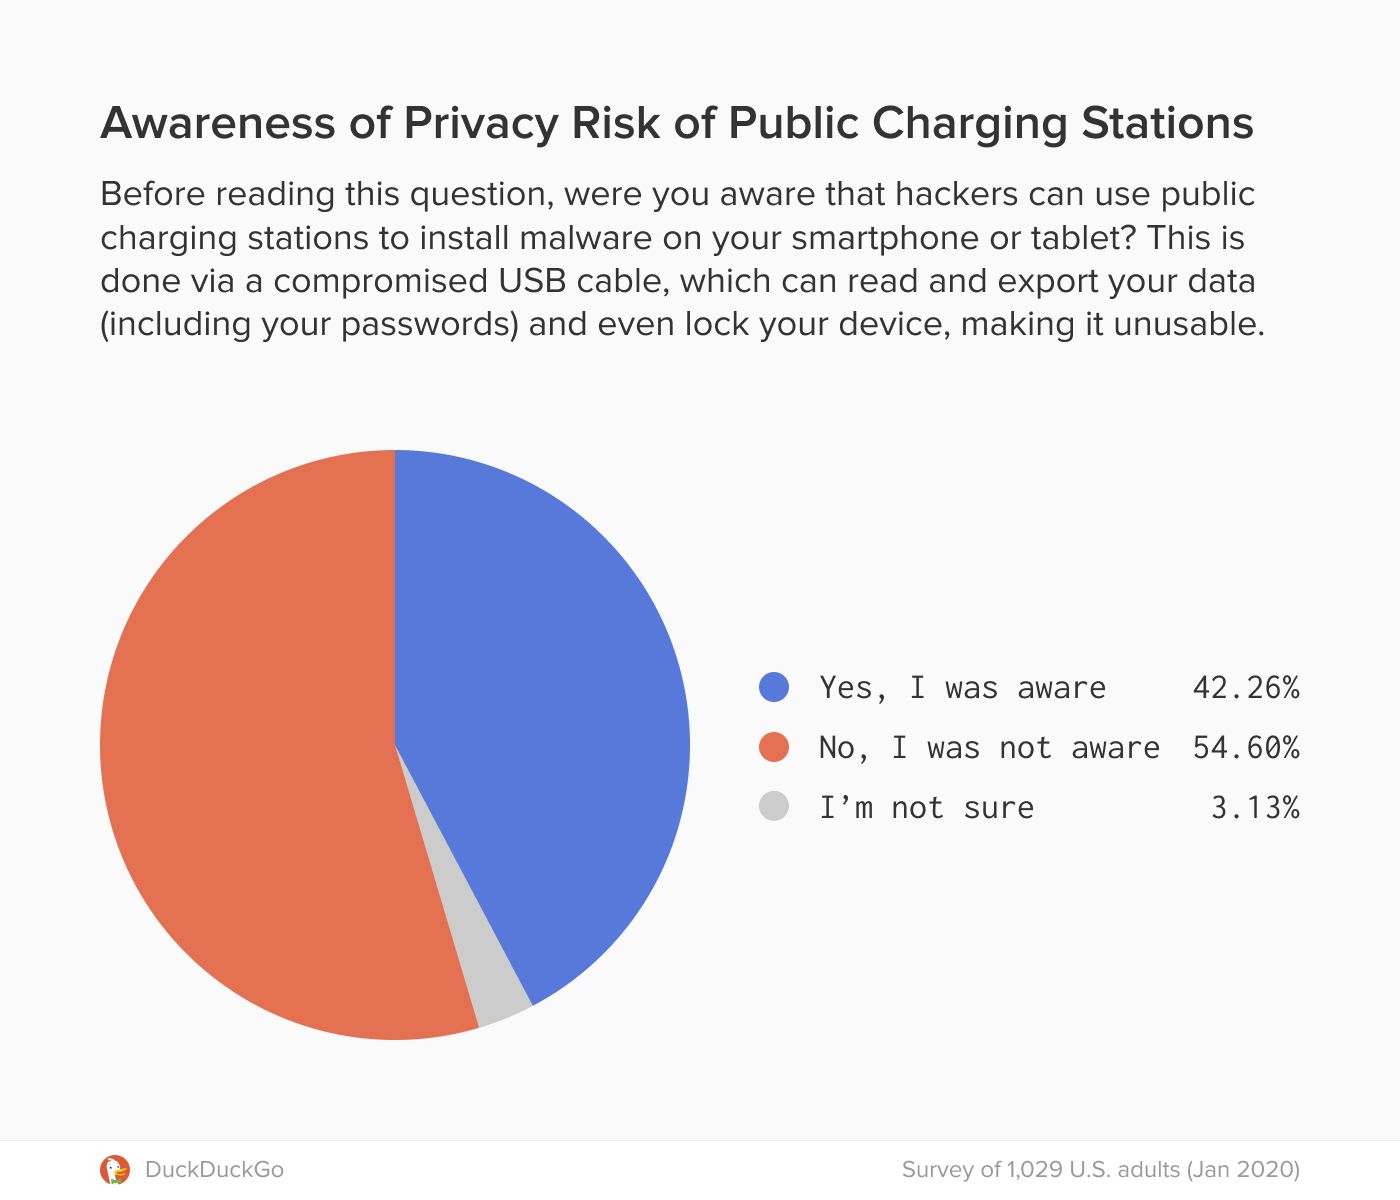 Graphic of a pie chart showing percentage of people aware of privacy risk of public charging stations